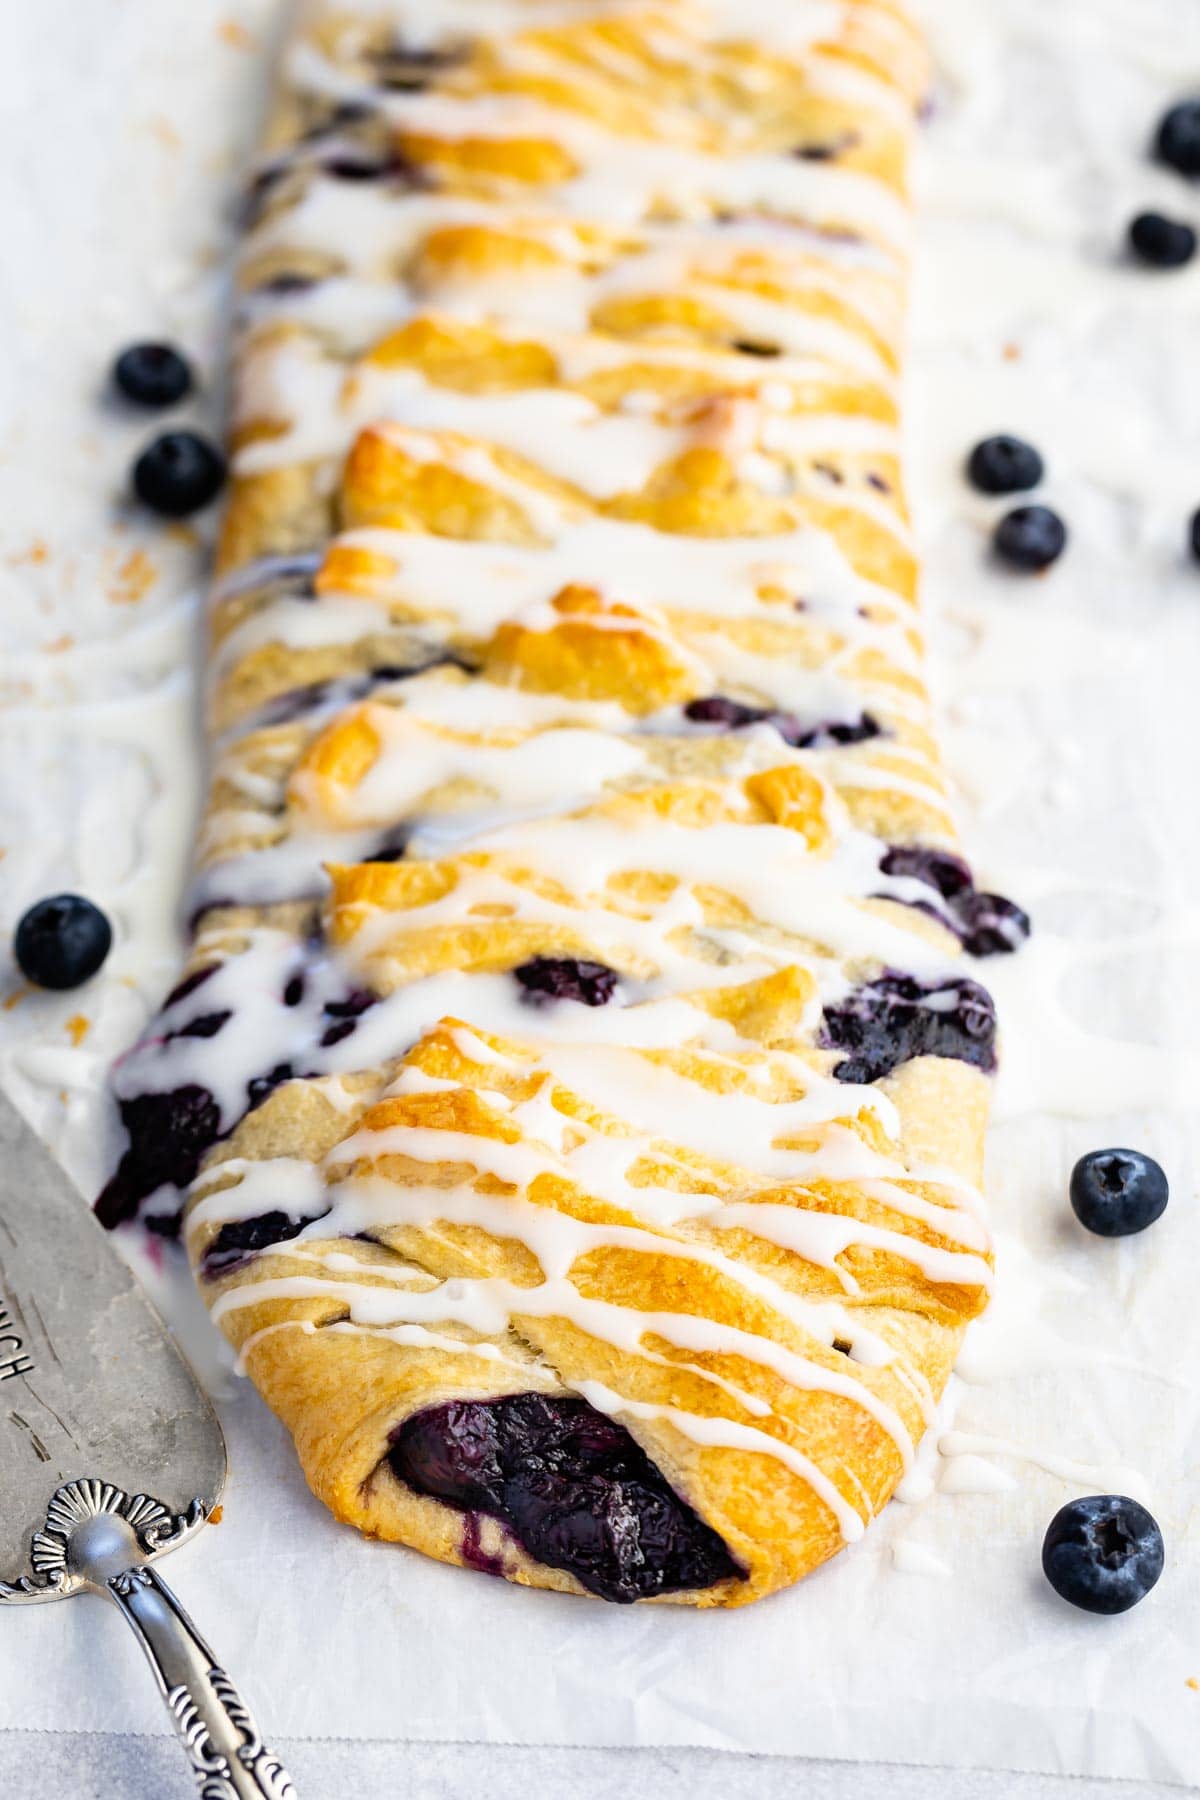 Blueberry danish with icing on top and blueberries spread around it